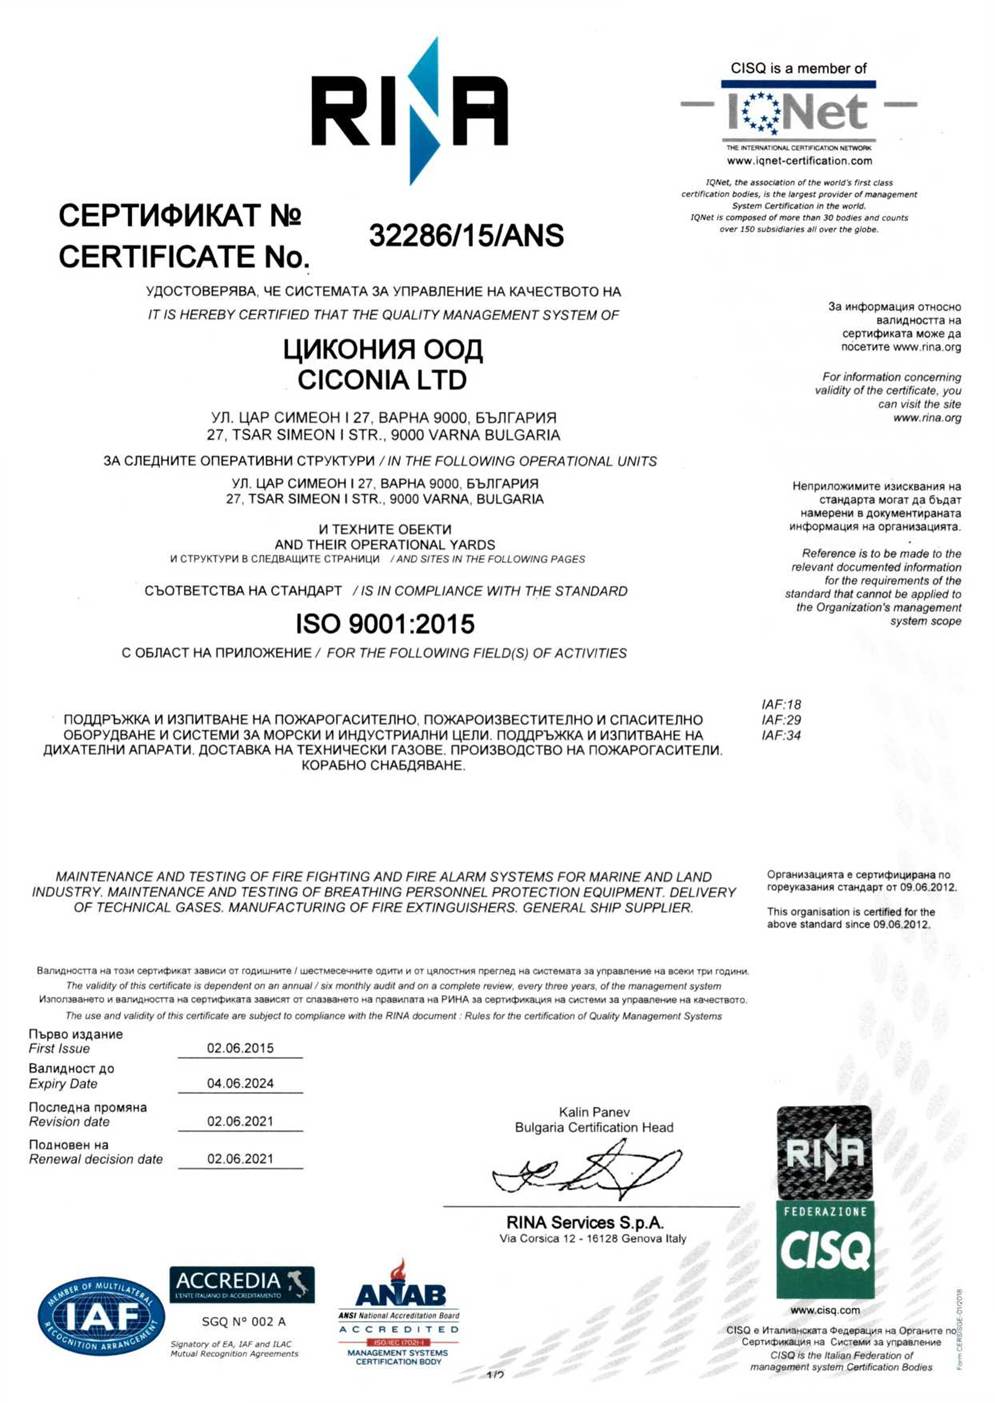 Ciconia ISO 9001:2015